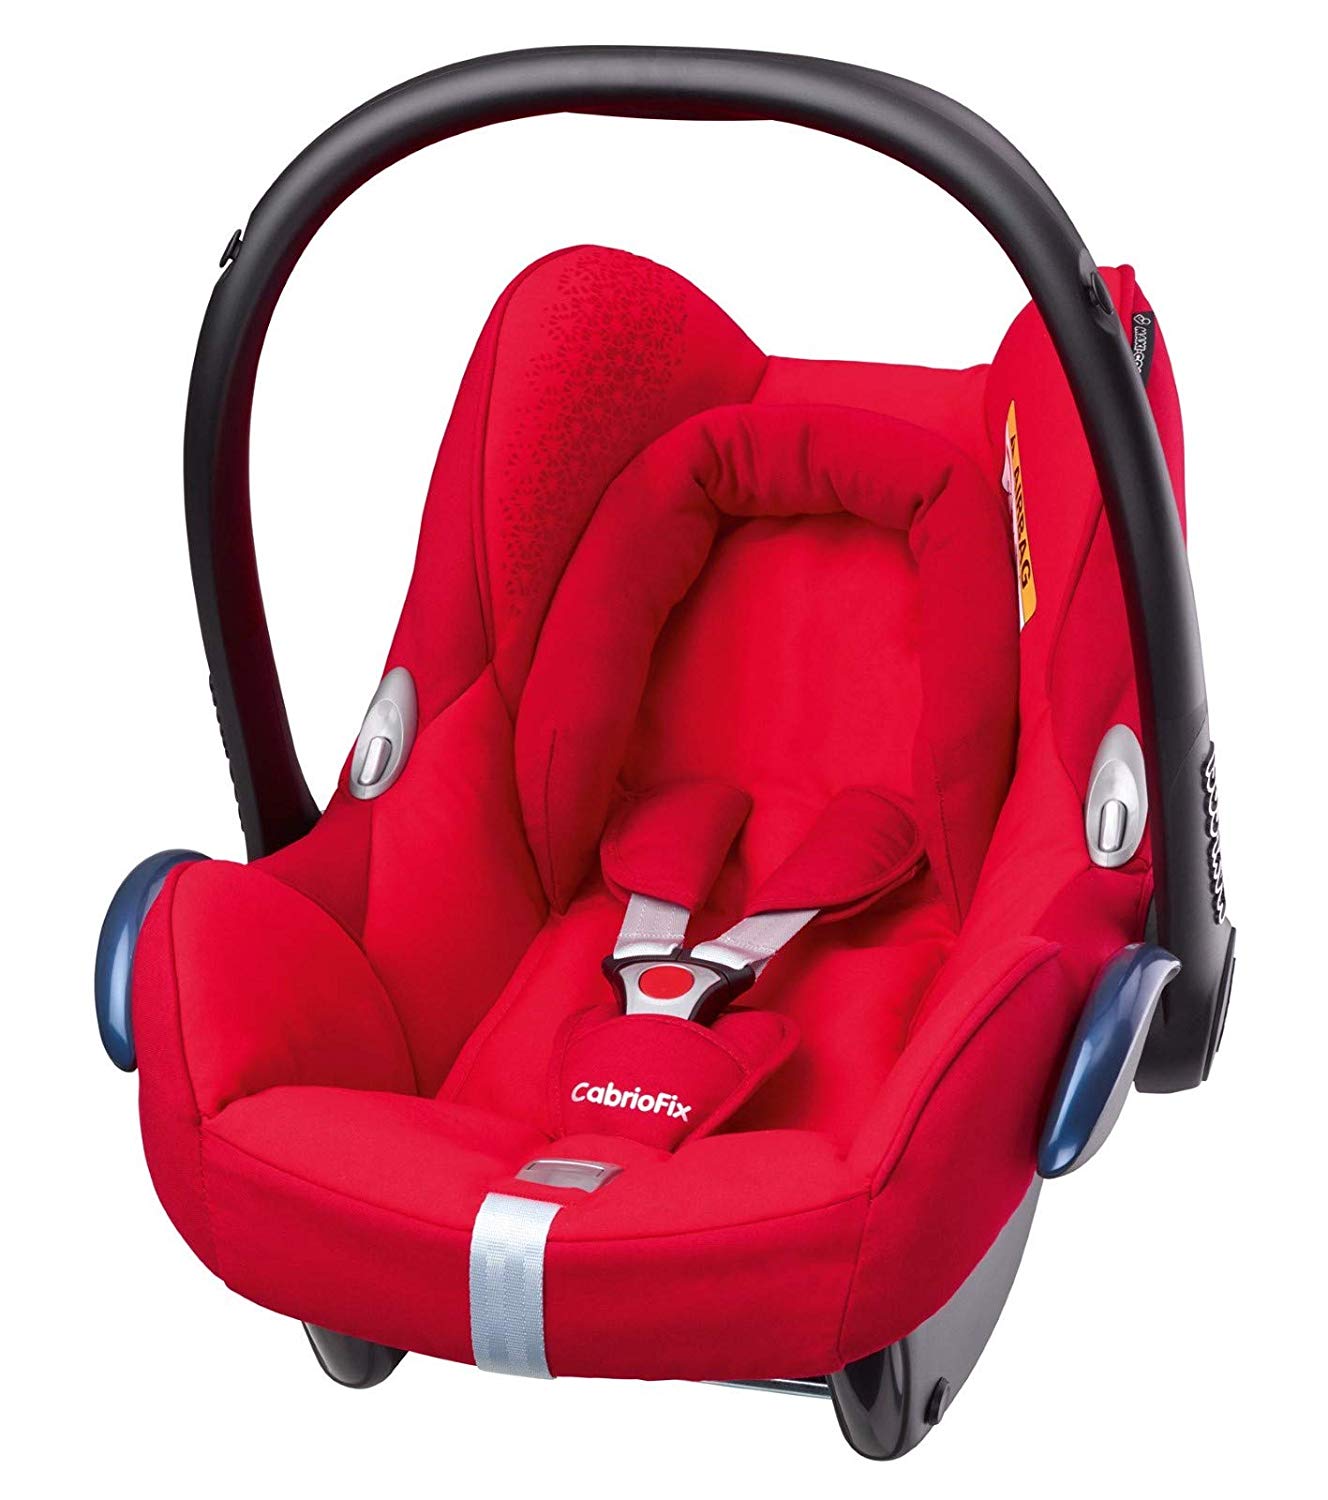 Maxi-Cosi Maxi Cosi Cabriofix Baby Car Seat Group 0+, Usable From Birth - 12 Months, 